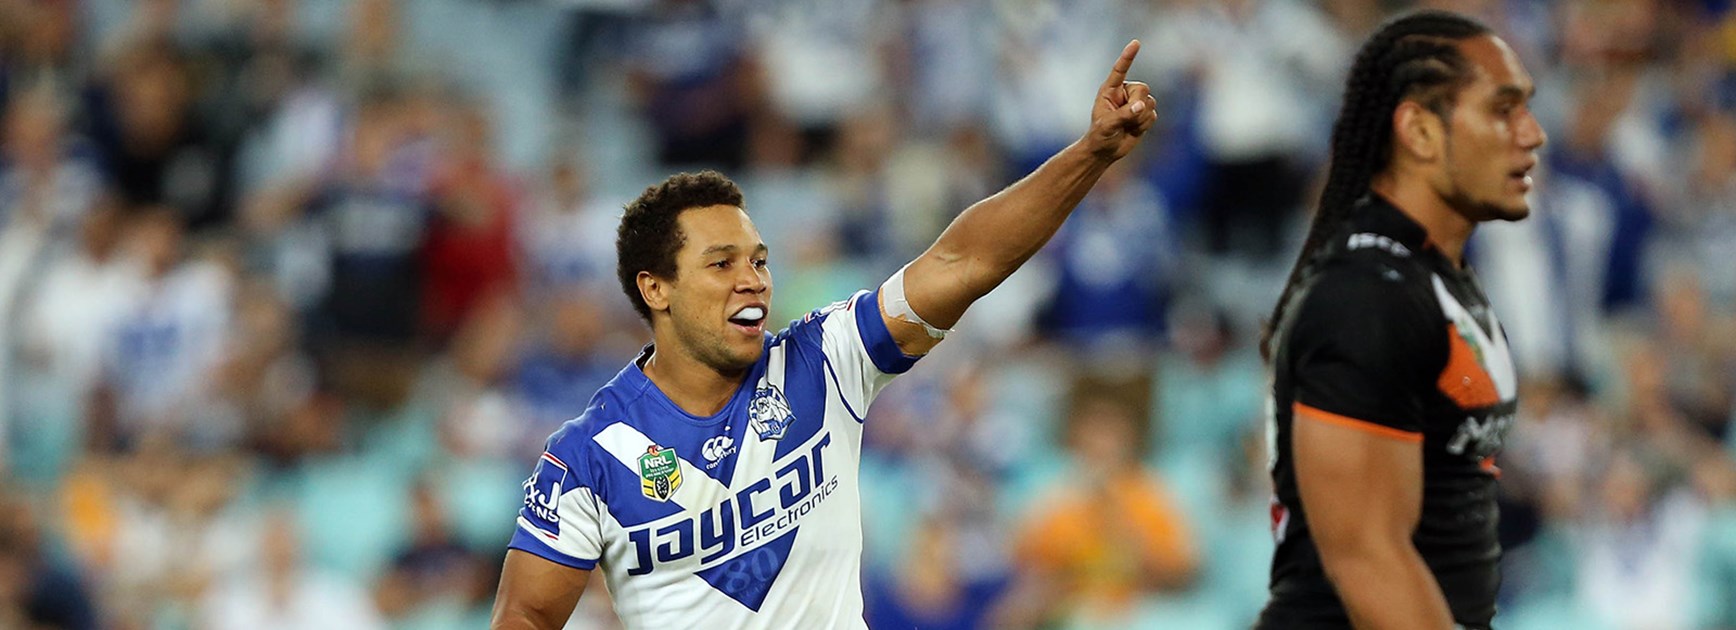 Bulldogs five-eighth Moses Mbye kicked a golden-point, match-winning field goal against the Tigers in Round 4.